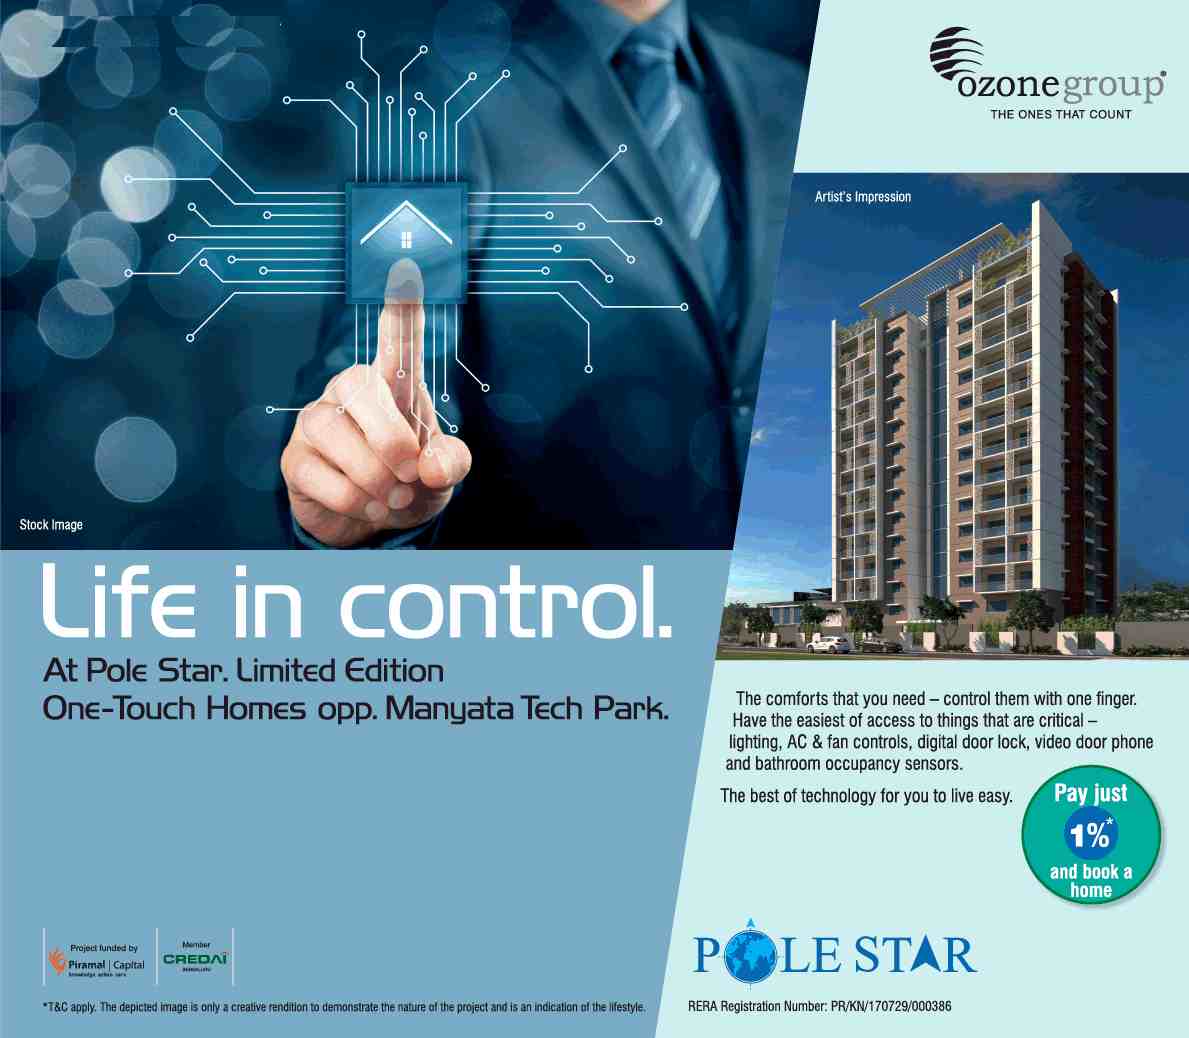 The best of technology for you to live easy at Ozone Pole Star in Bangalore Update